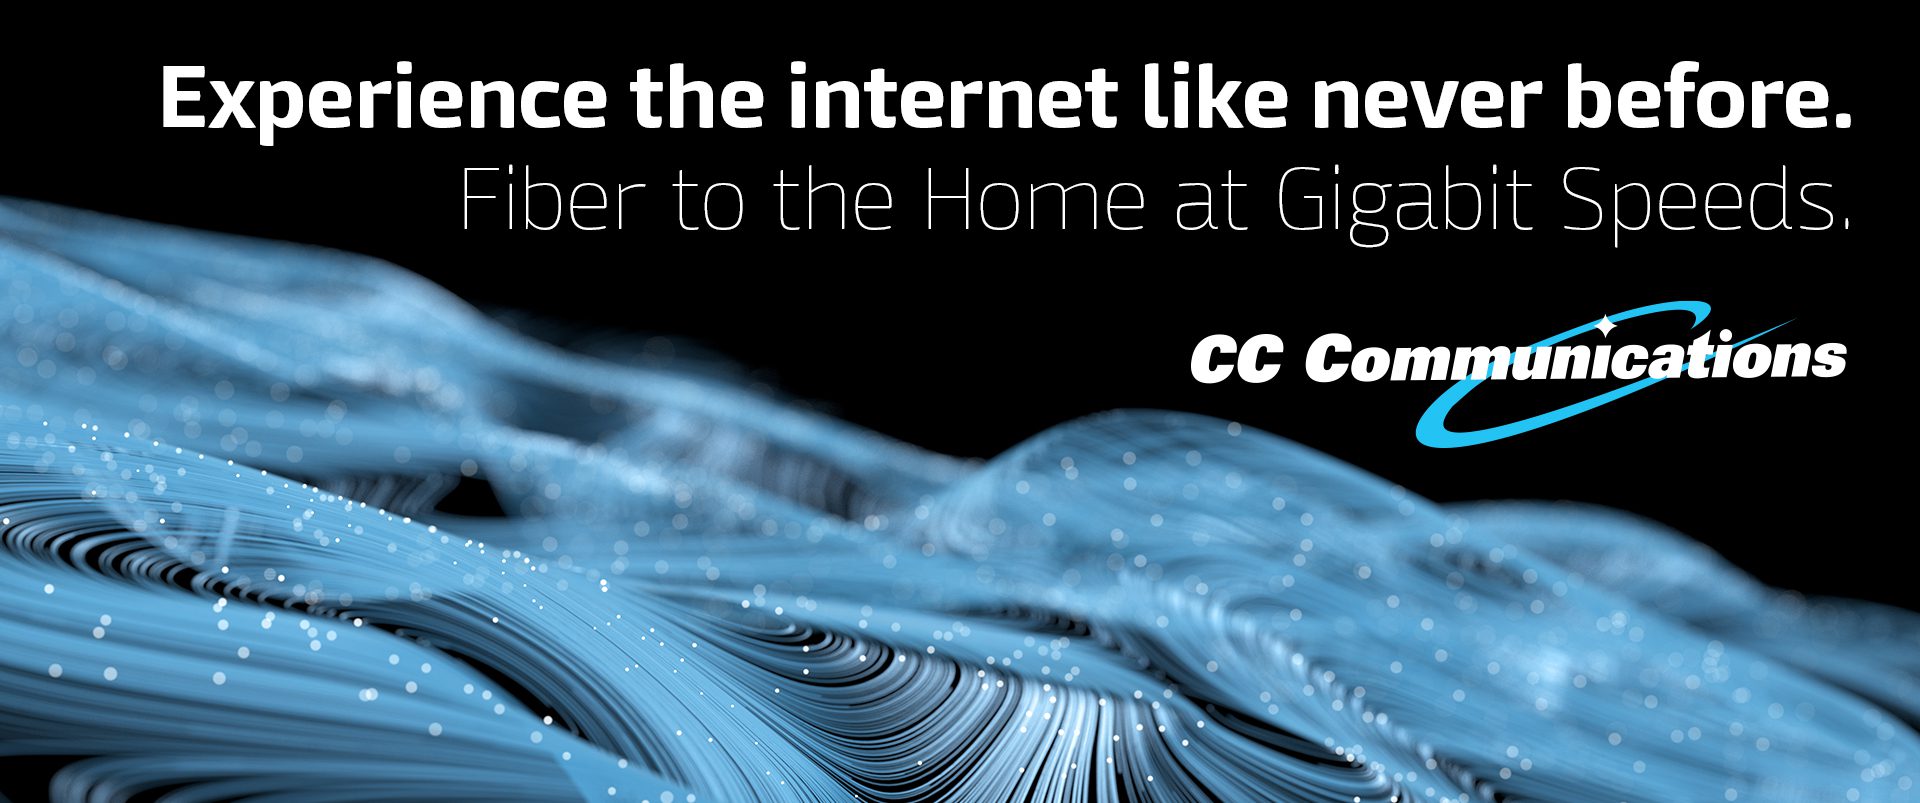 Experience the internet like never before. Fiber to the Home at Gigabit Speeds.